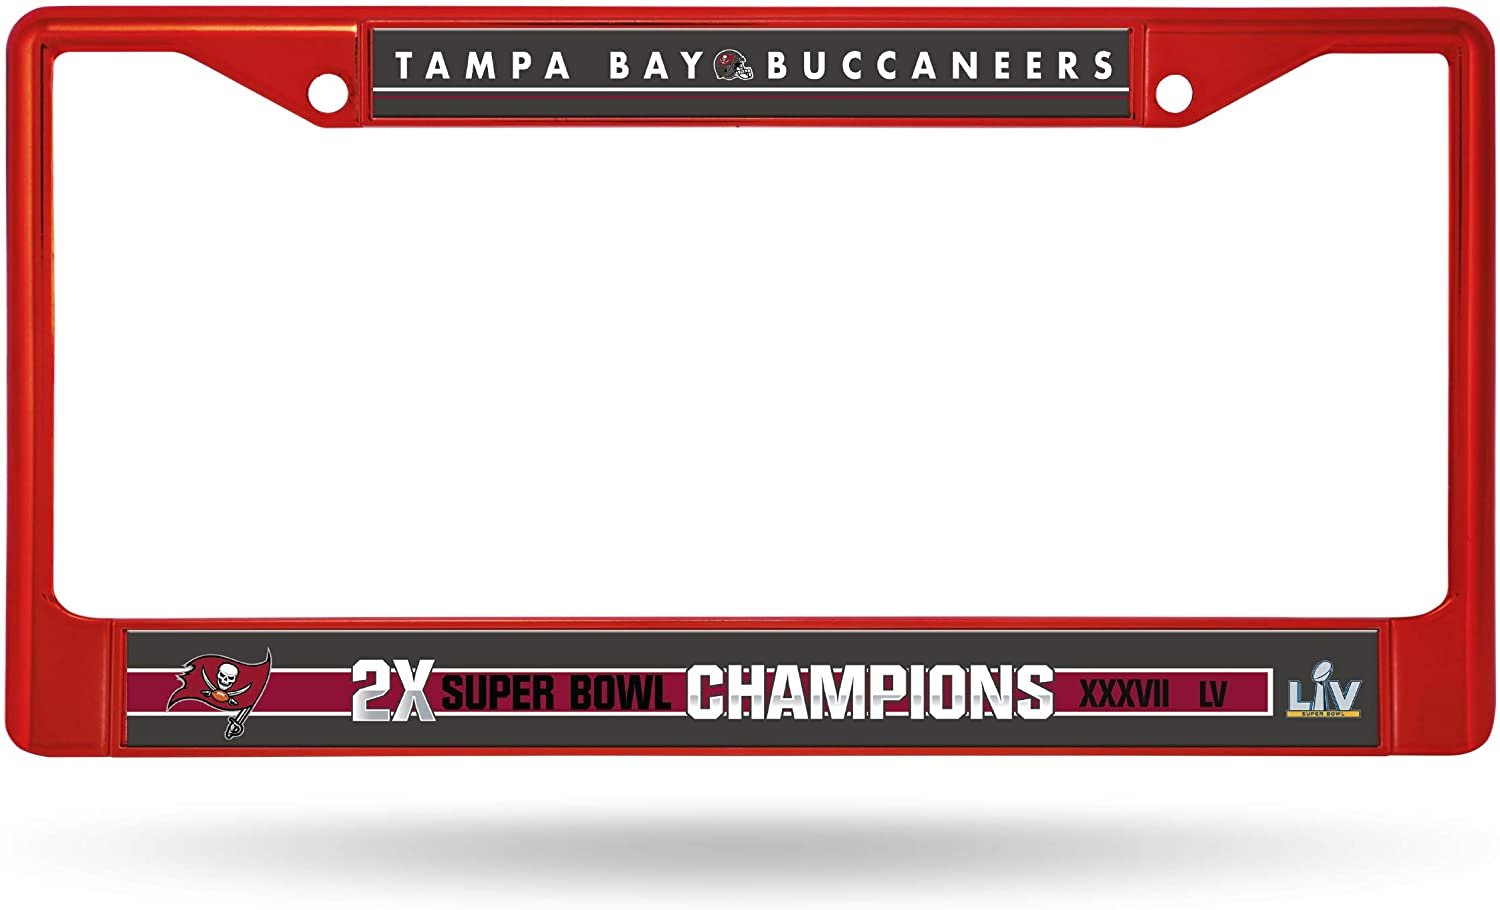 Tampa Bay Buccaneers 2 Time Super Bowl Champions Metal License Plate Frame Tag Cover, 6x12 Inch, Colored Chrome